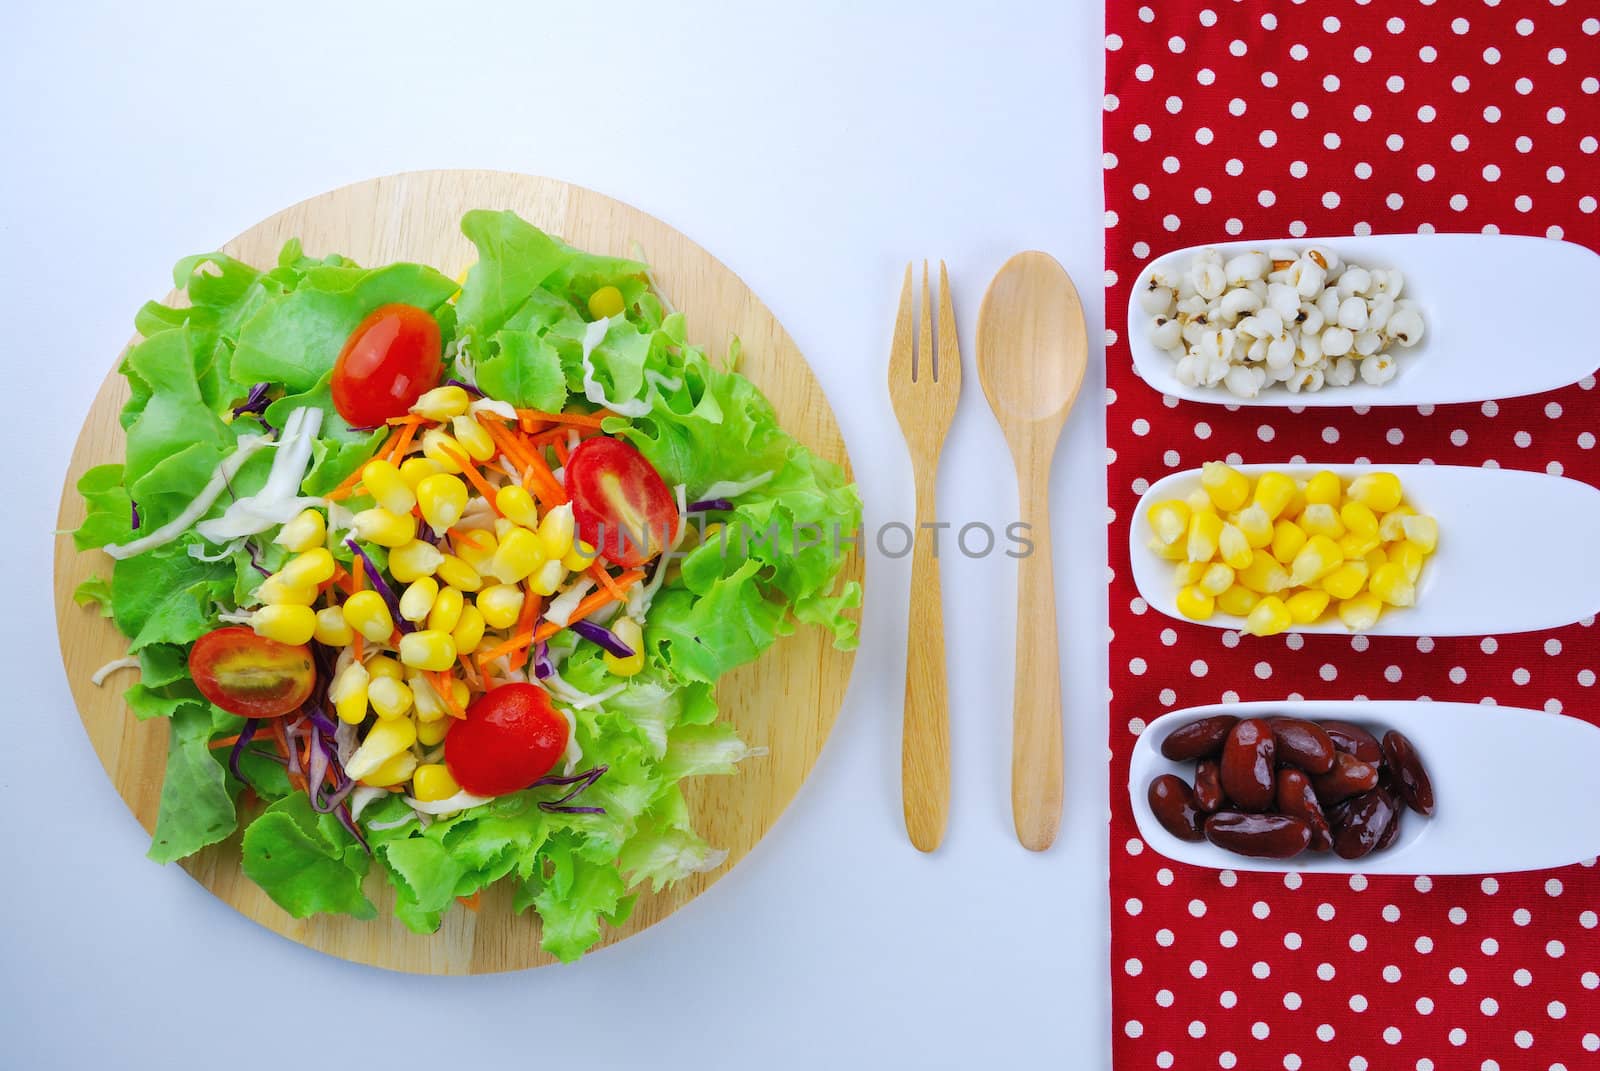 Fresh vegetable salad with corn,carrot,tomato,green oak,red oak,Red bean and millet